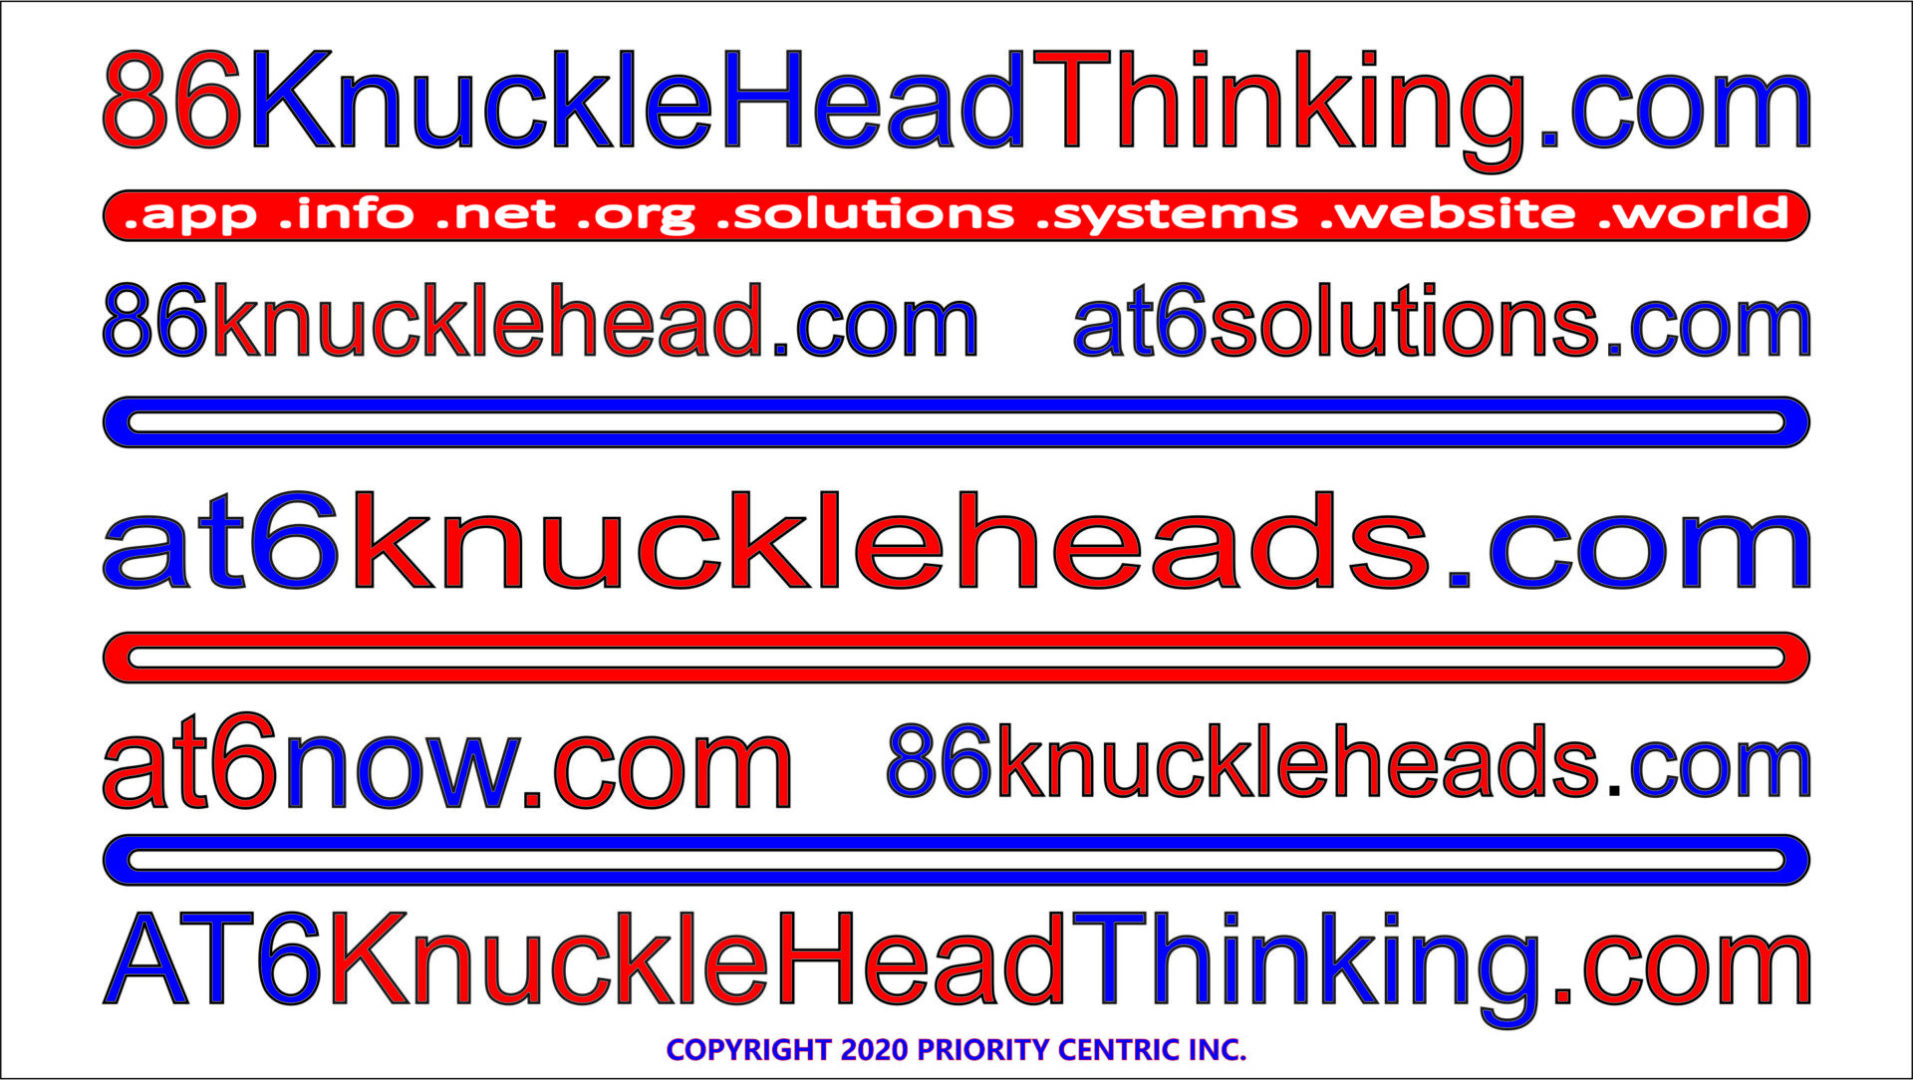 86knuckleheadthinking CR2020